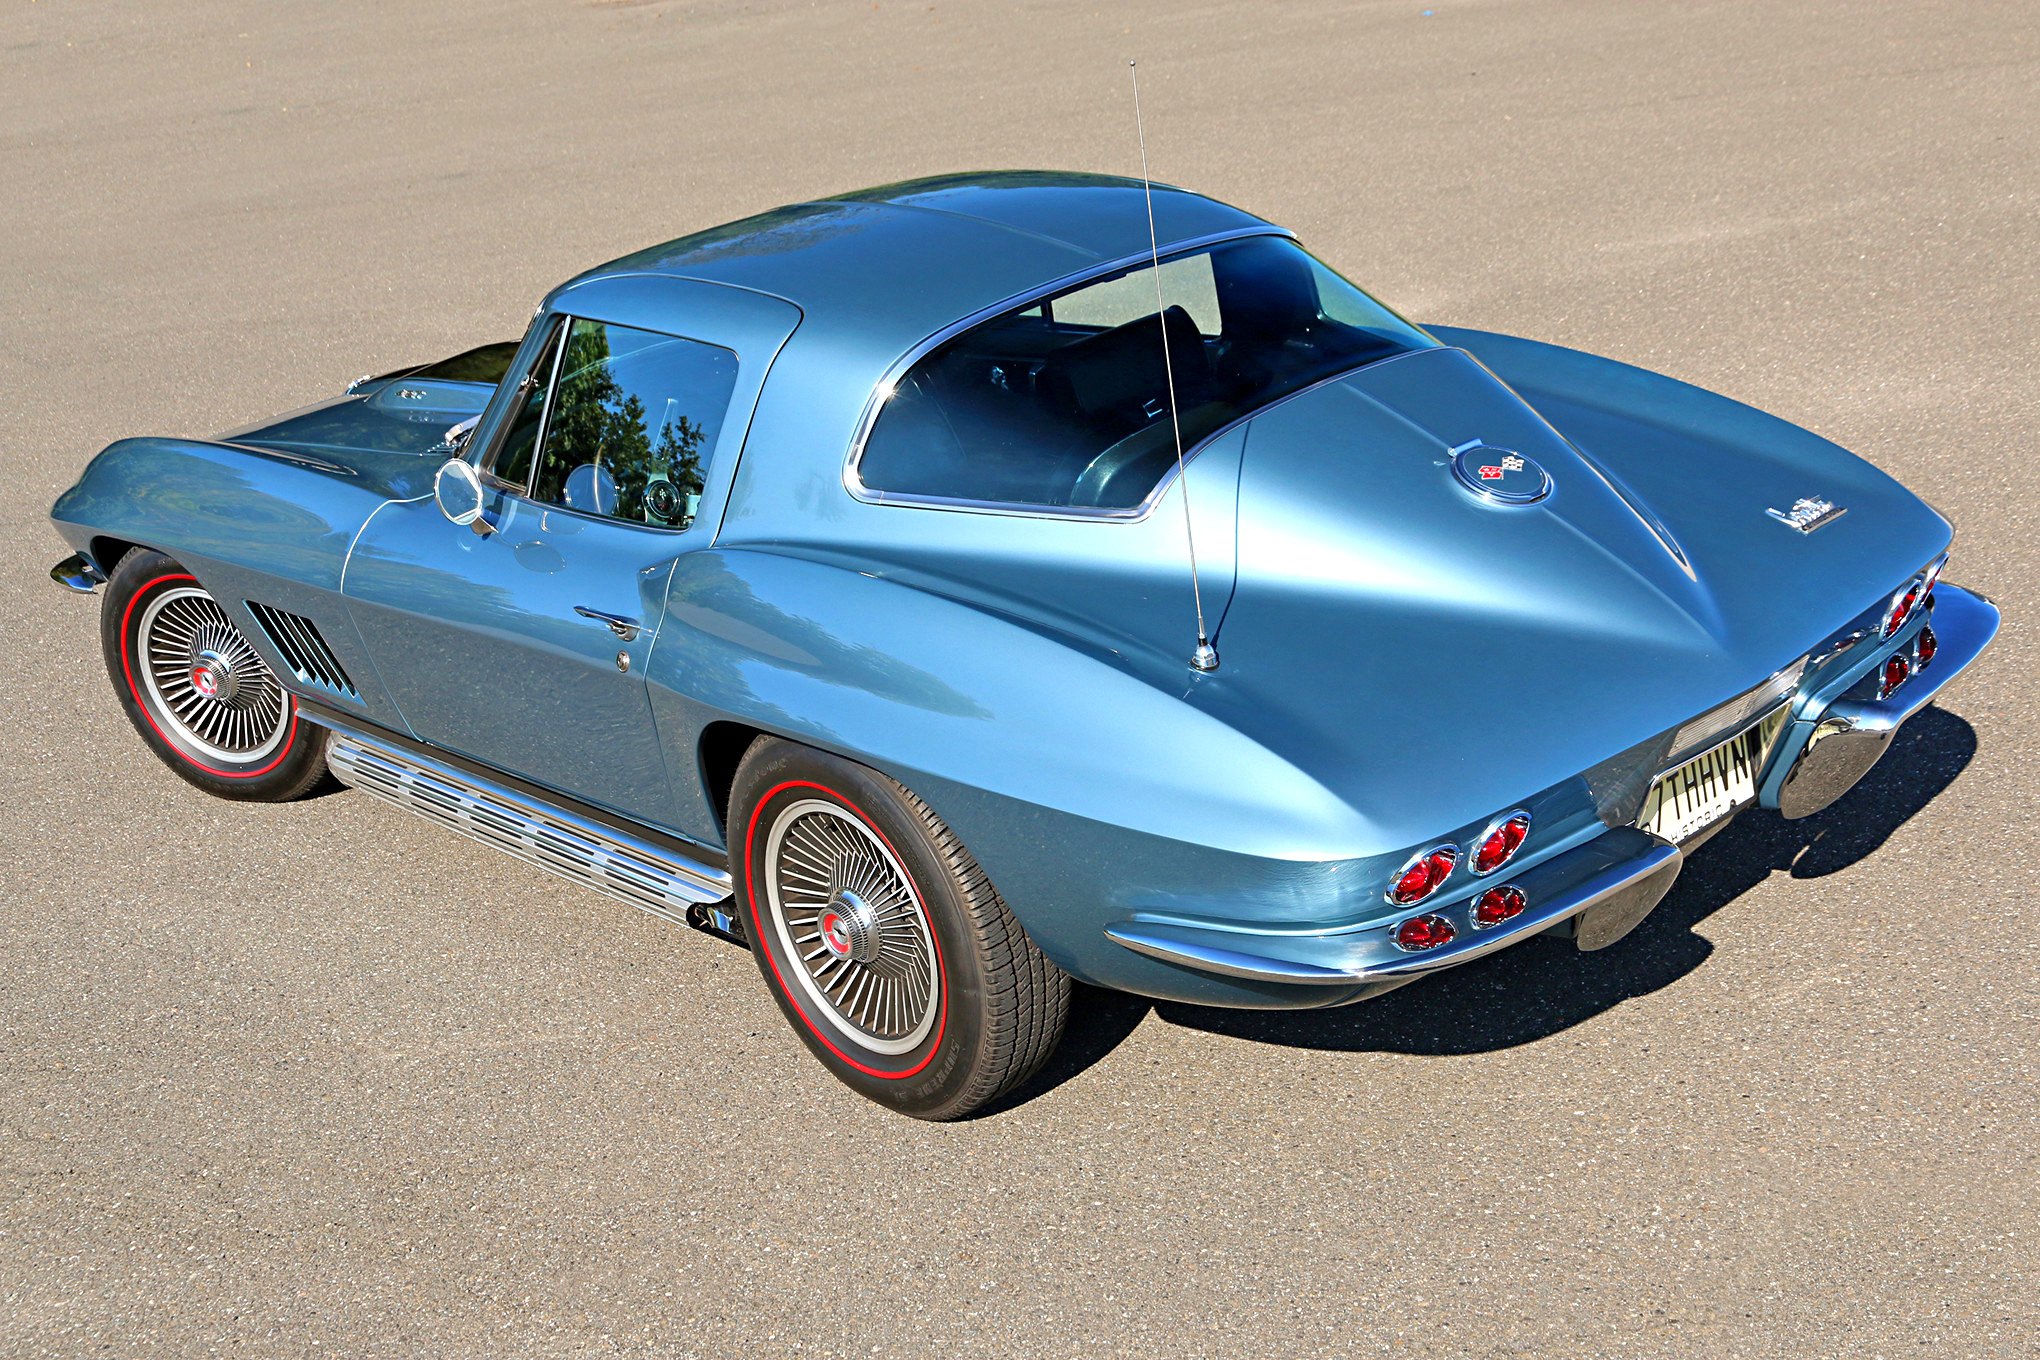 Light Blue Chevy Corvette with Chrome Side Skirts - Photo by Grant Cox